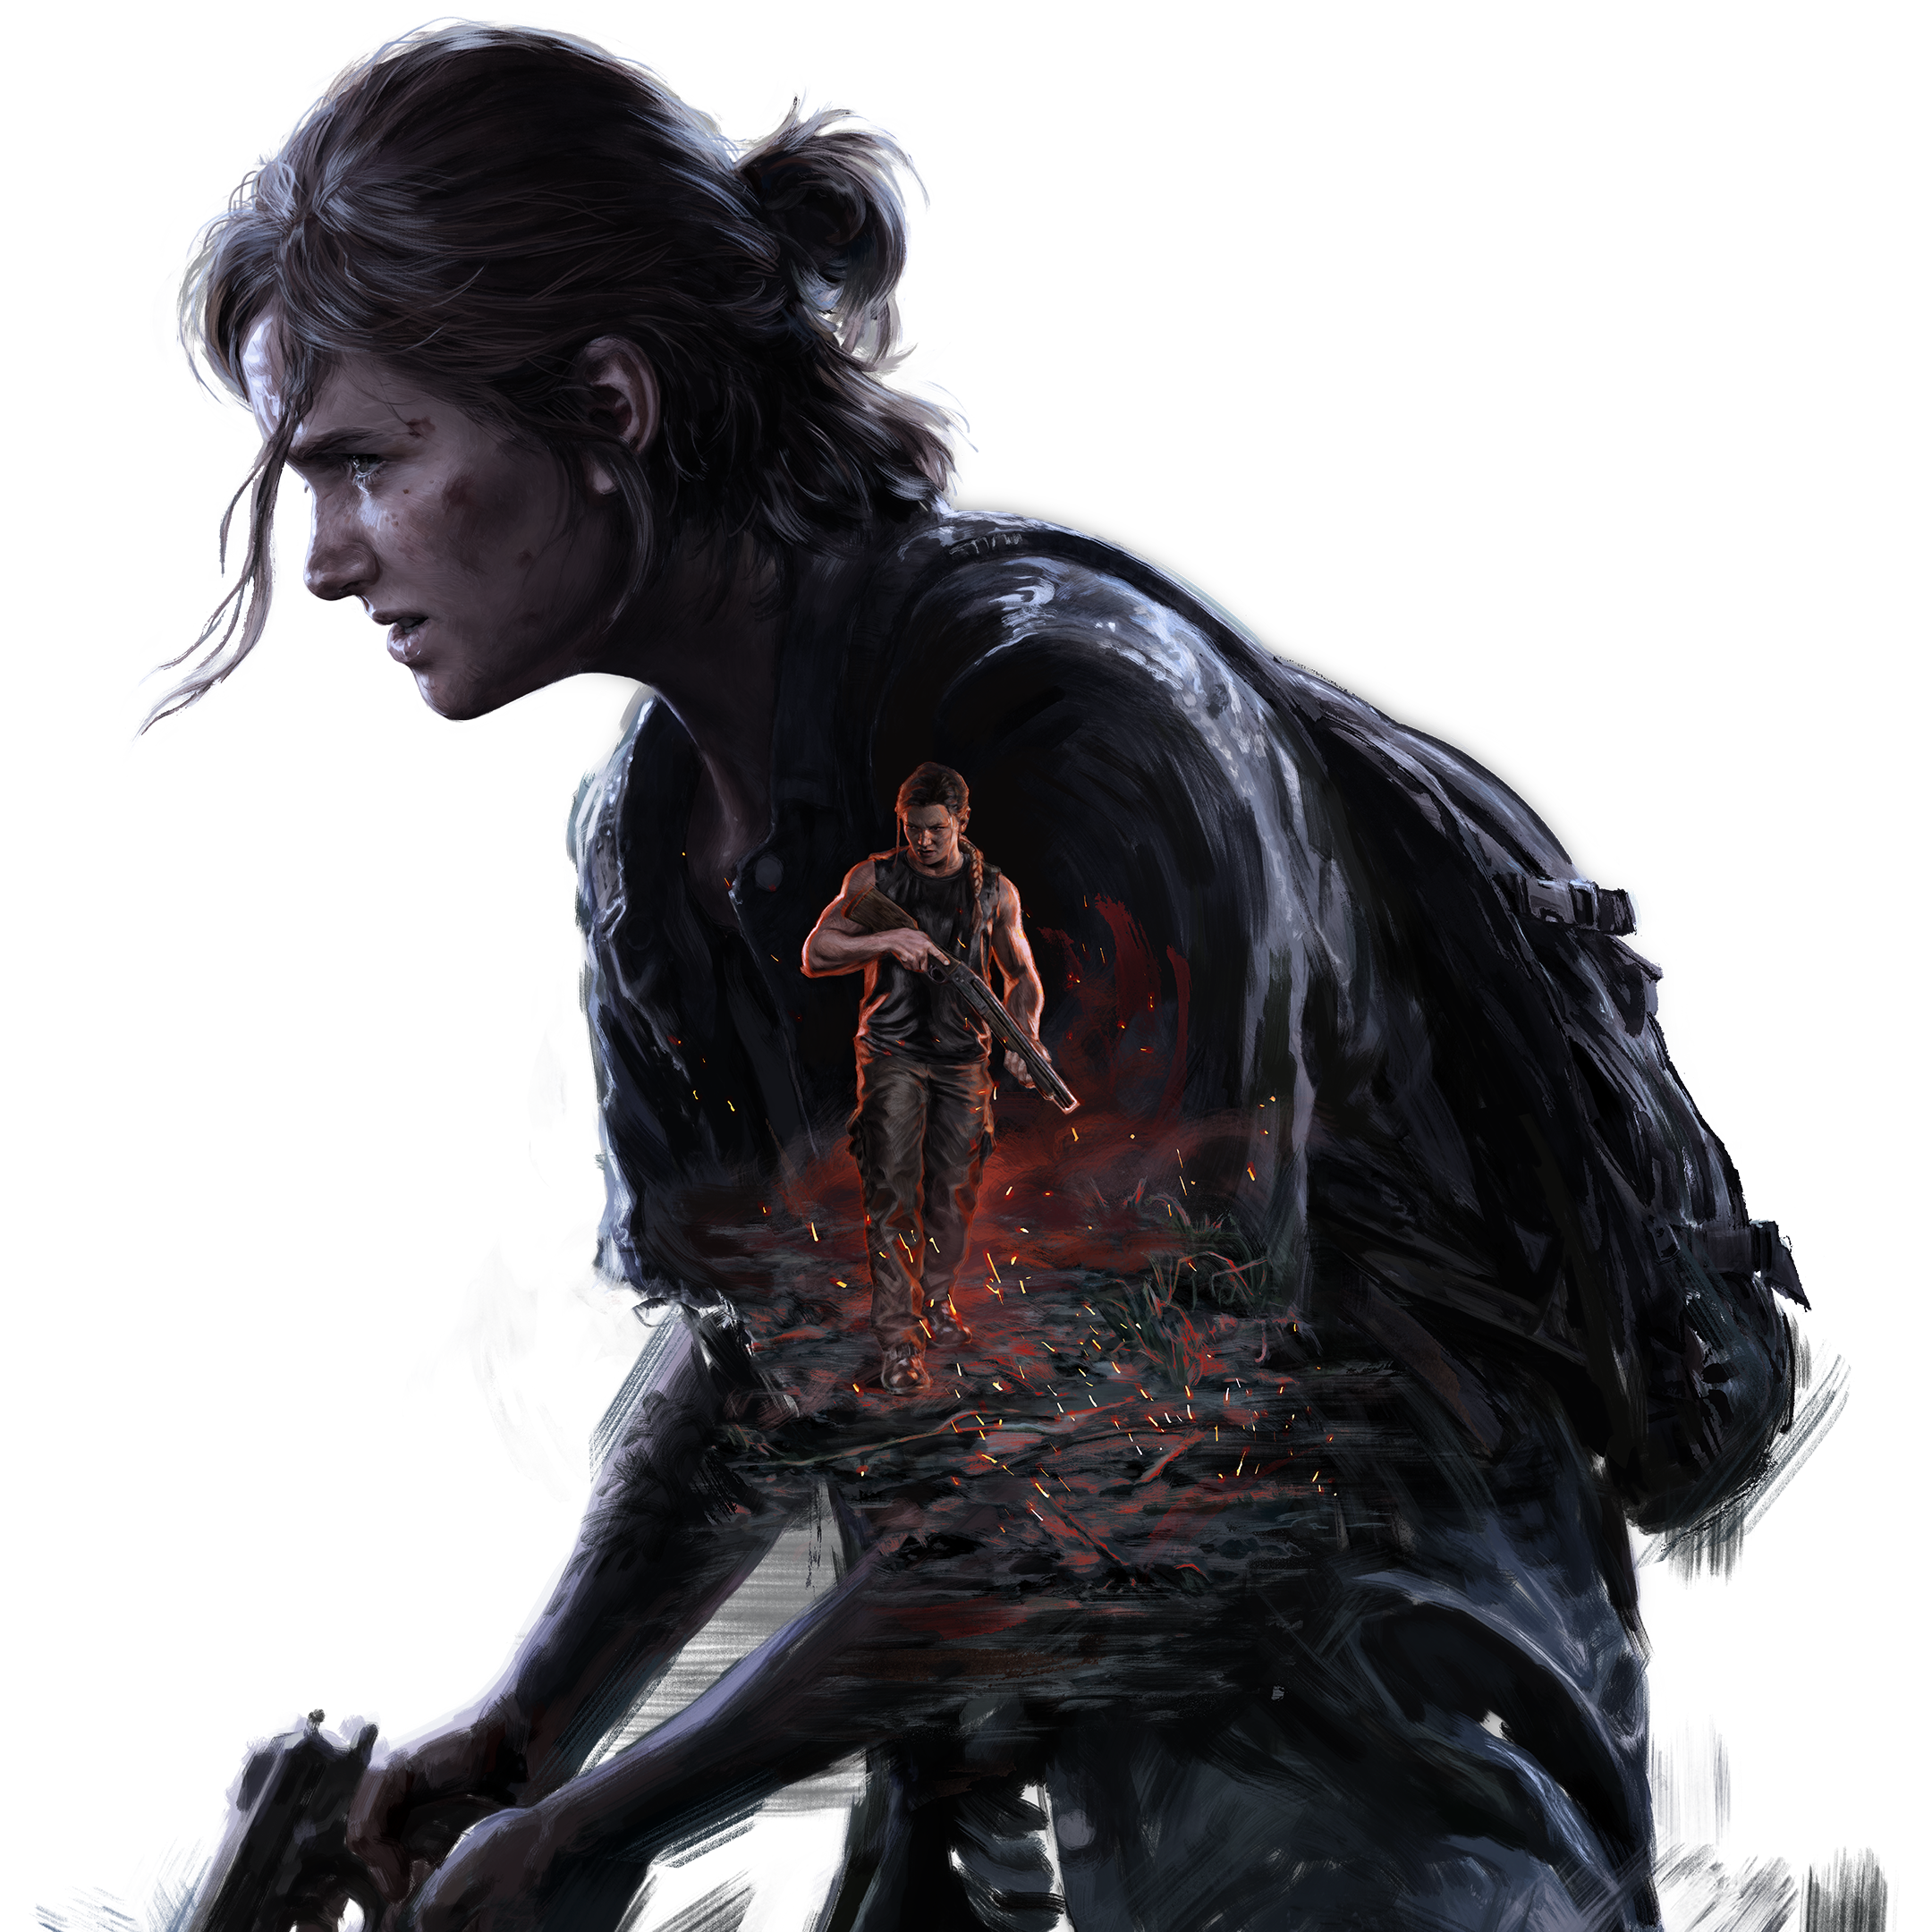 The Last of Us Part II – PlayStation